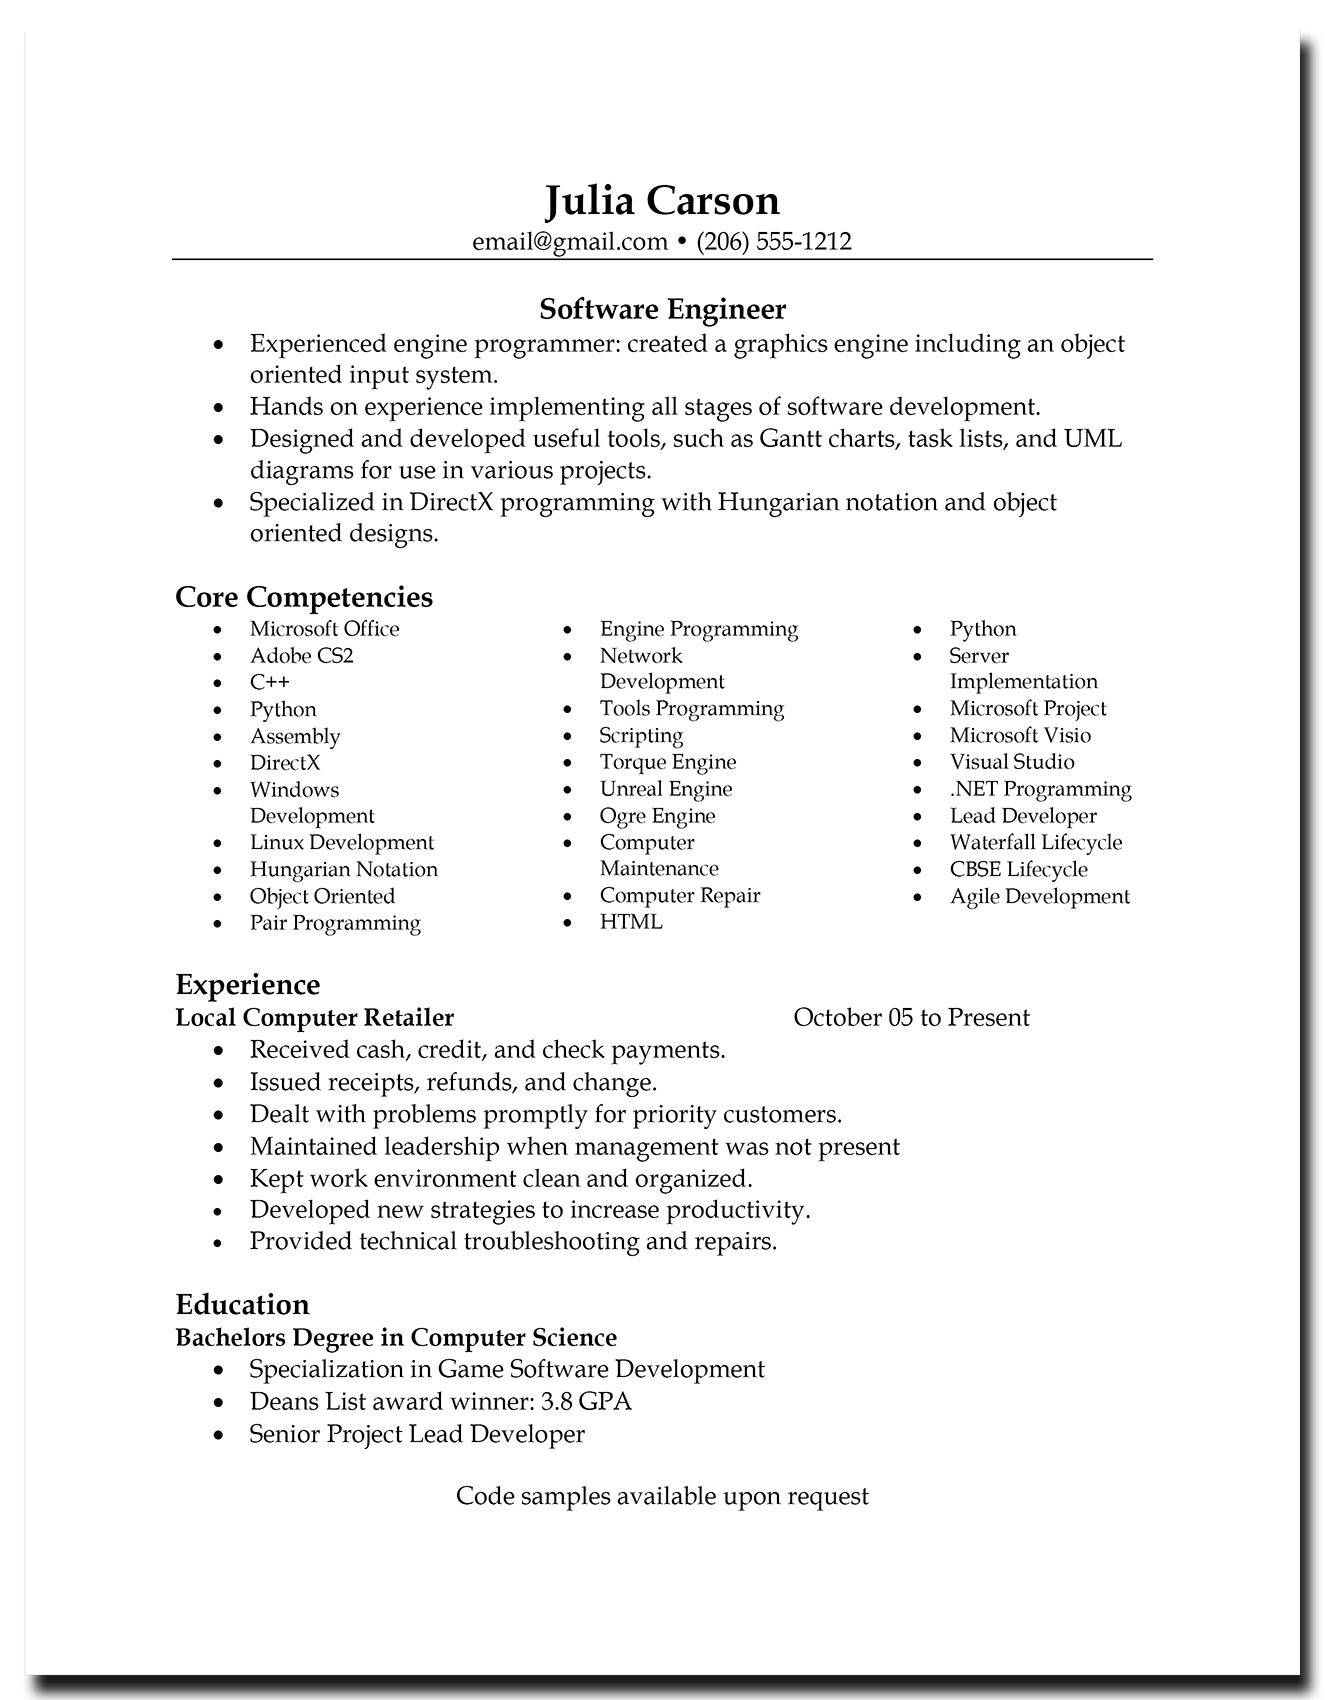 Video Game Resume #2: Computer geek with leadership potential